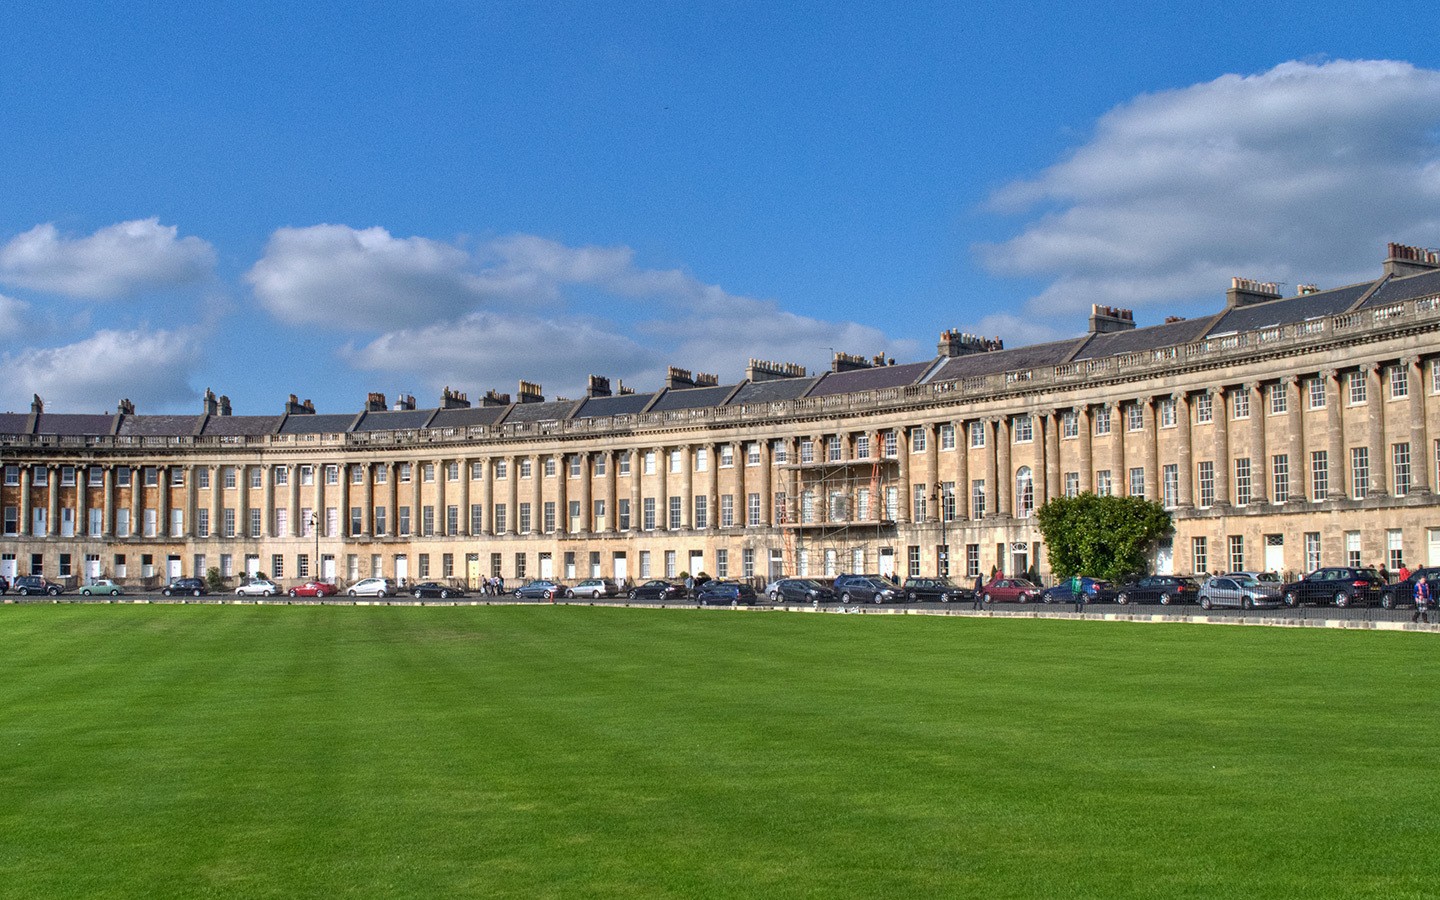 The curving Georgian buildings of the Royal Crescent in Bath